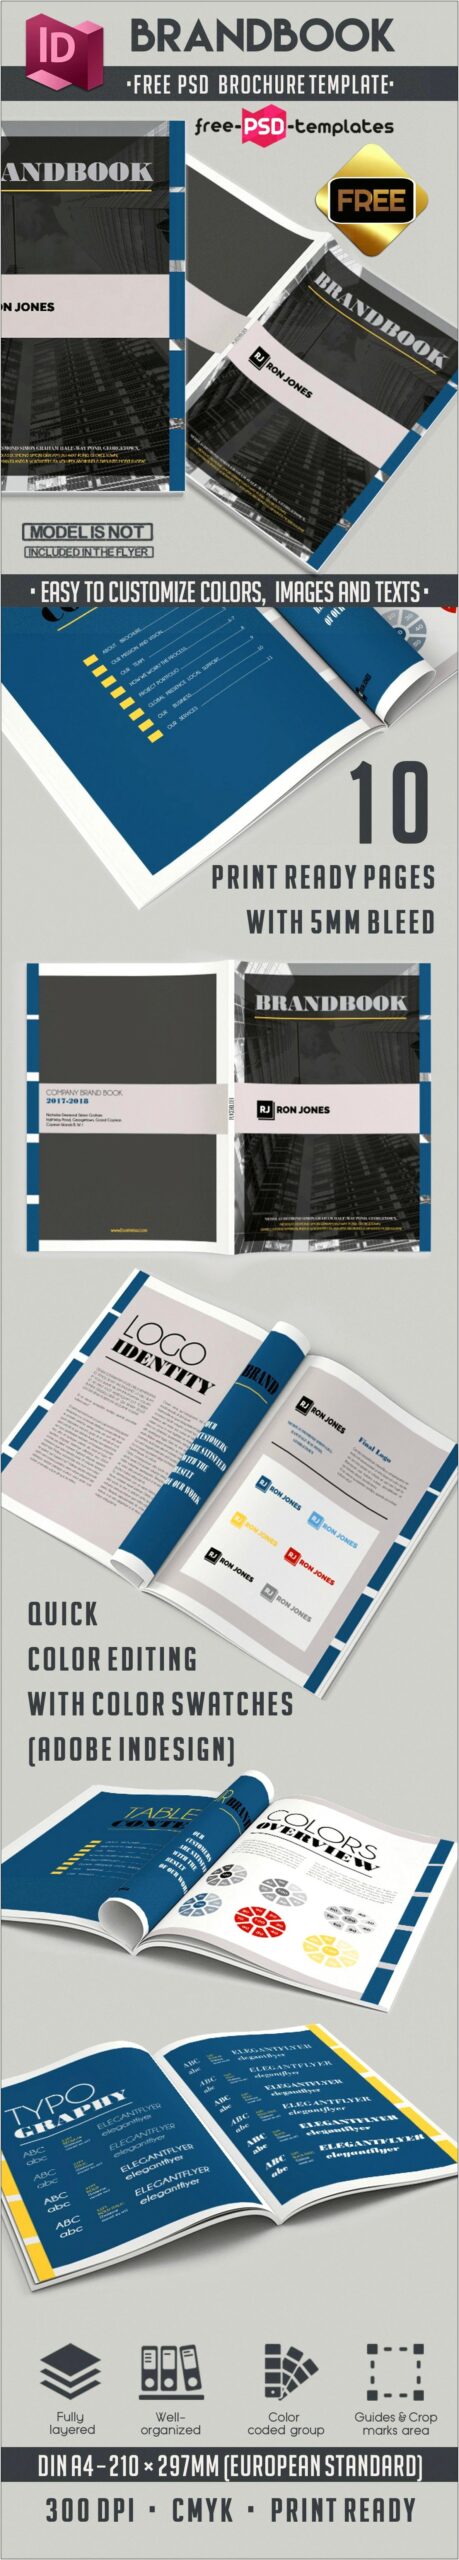 Brand Book Template Vector Free Download